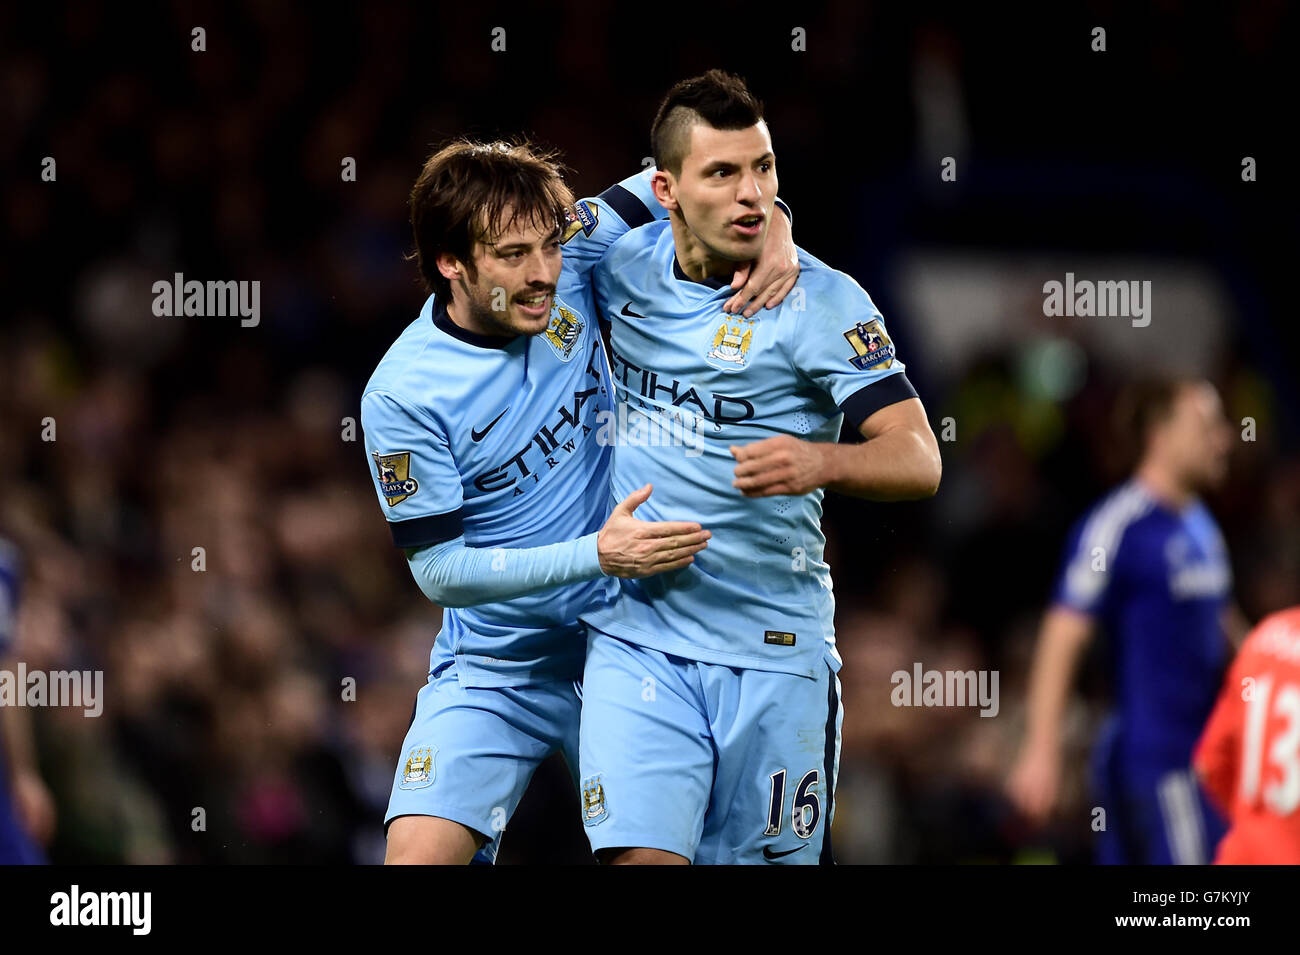 Manchester City's David Silva (left) celebrates with team mate Sergio Aguero (right) after scoring his sides first goal of the game during the Barclays Premier League match at Stamford Bridge, London. PRESS ASSOCIATION Photo. Picture date: Saturday January 31, 2015. See PA story SOCCER Chelsea. Photo credit should read: Adam Davy/PA Wire. Stock Photo